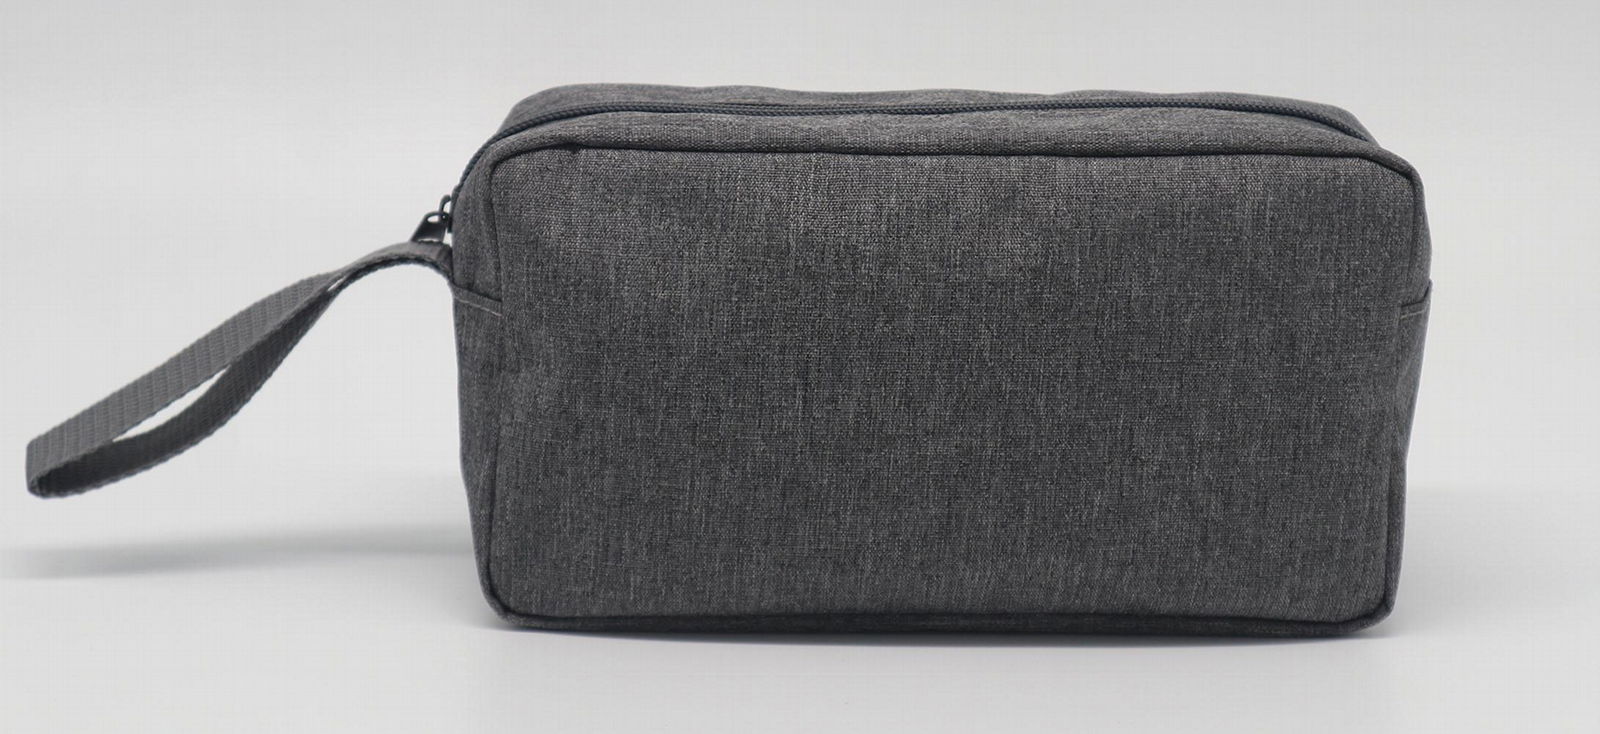 Promotion gift cheap men toiletry bag grey colour polyester made 2